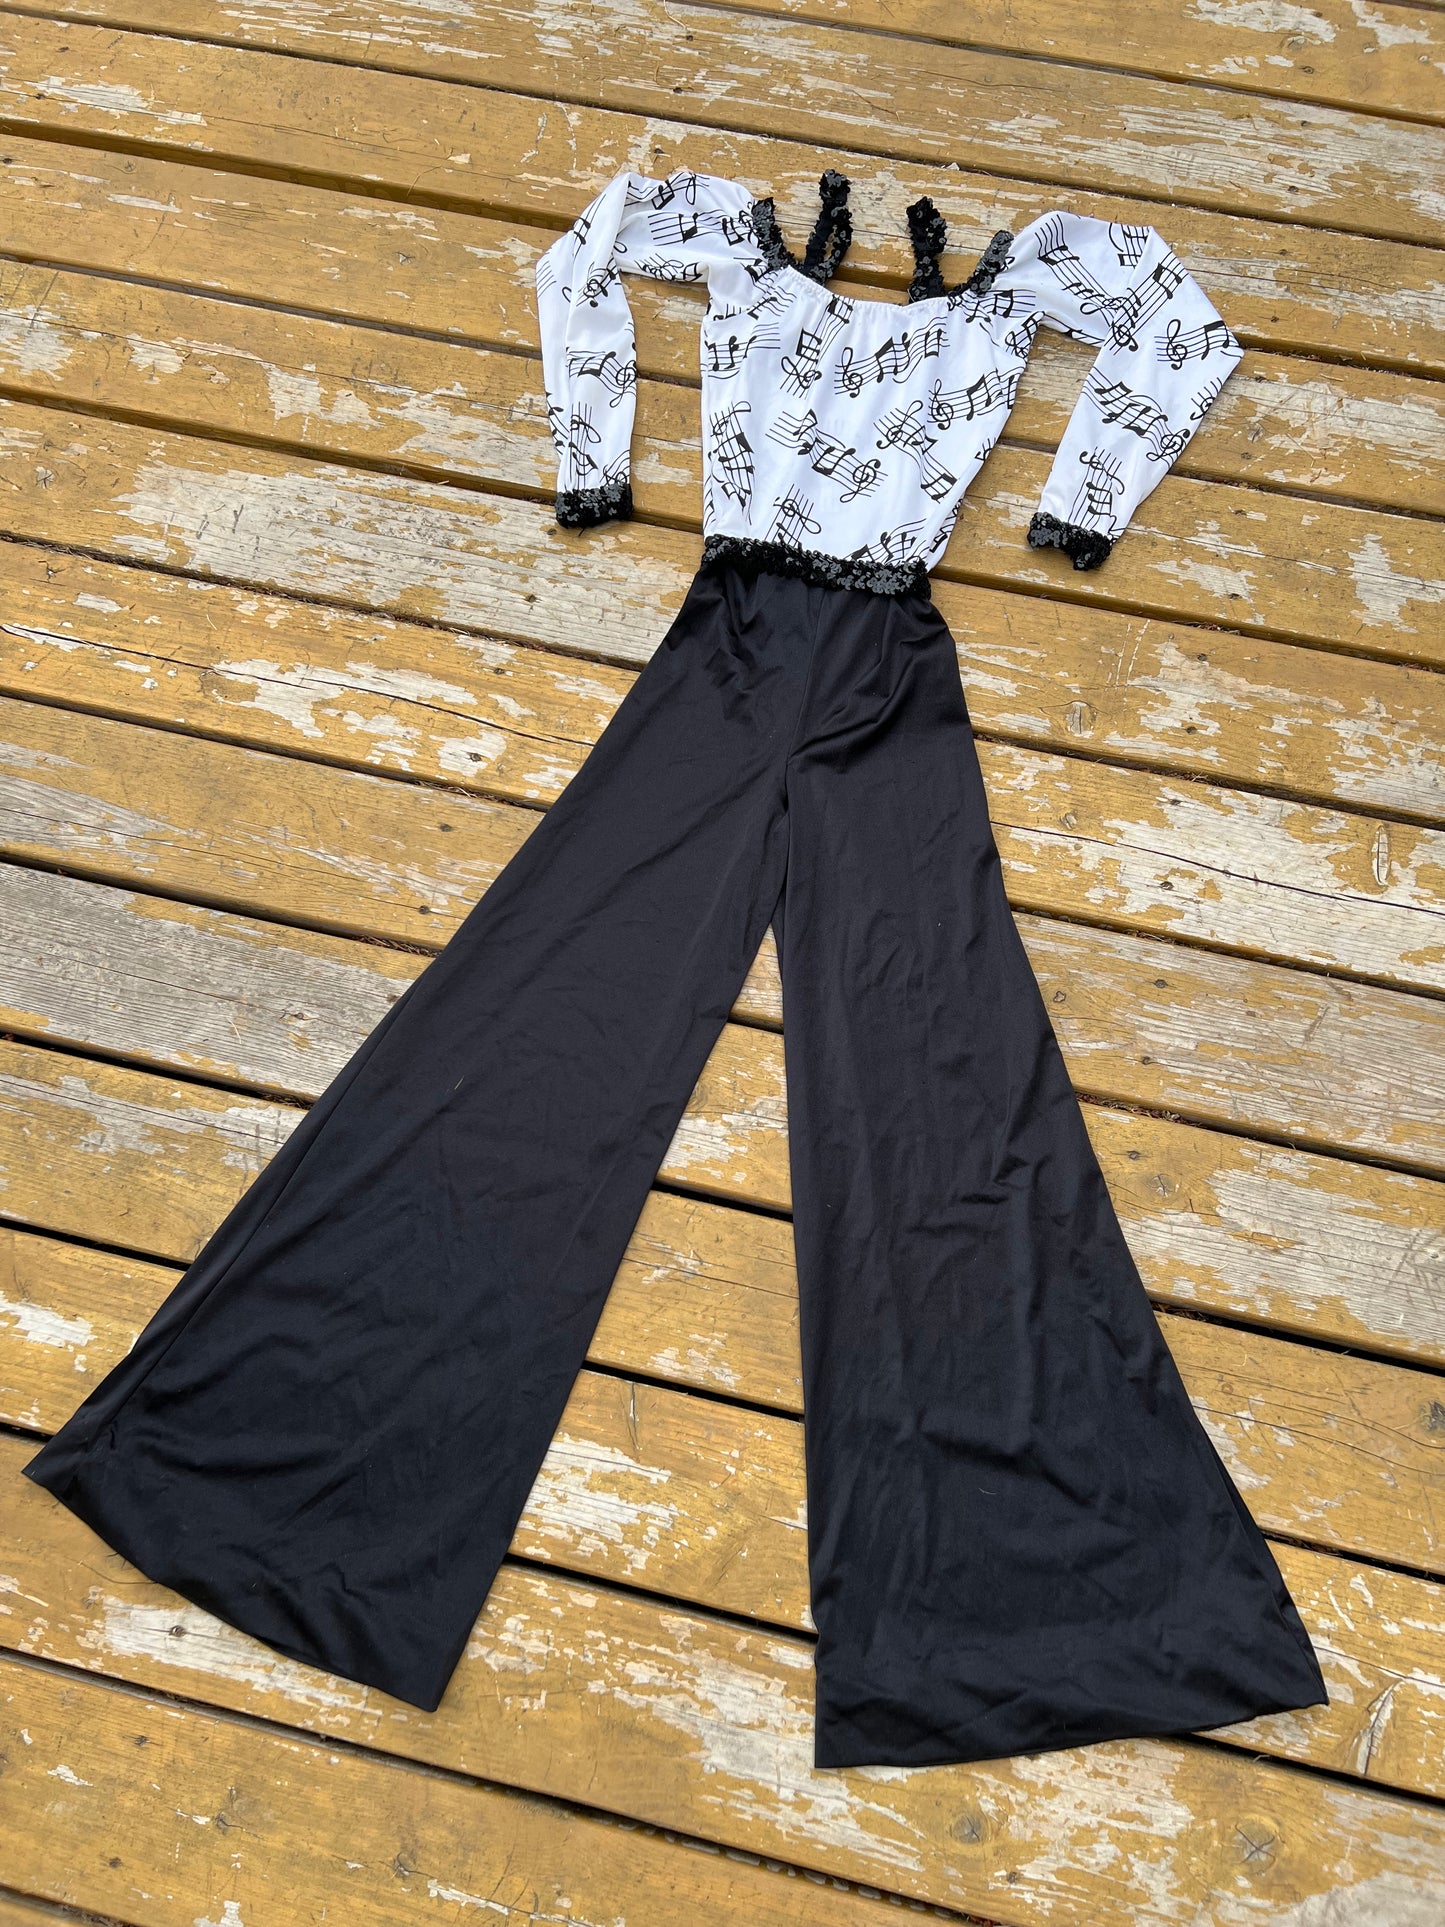 90s Musical Note Novelty Jumpsuit - XS